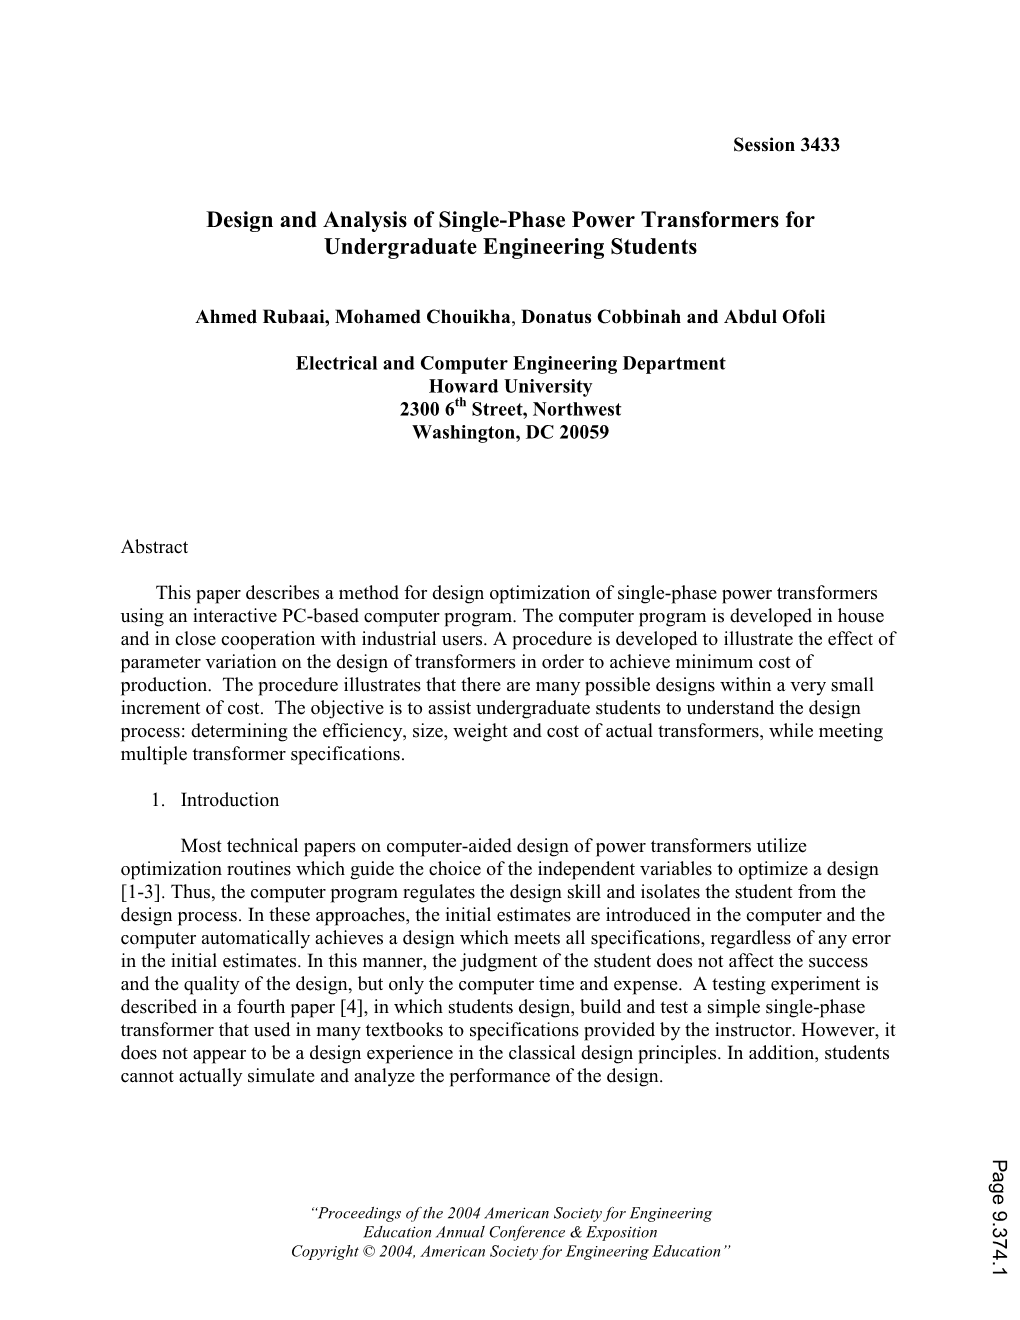 Design and Analysis of Single Phase Power Transformers For